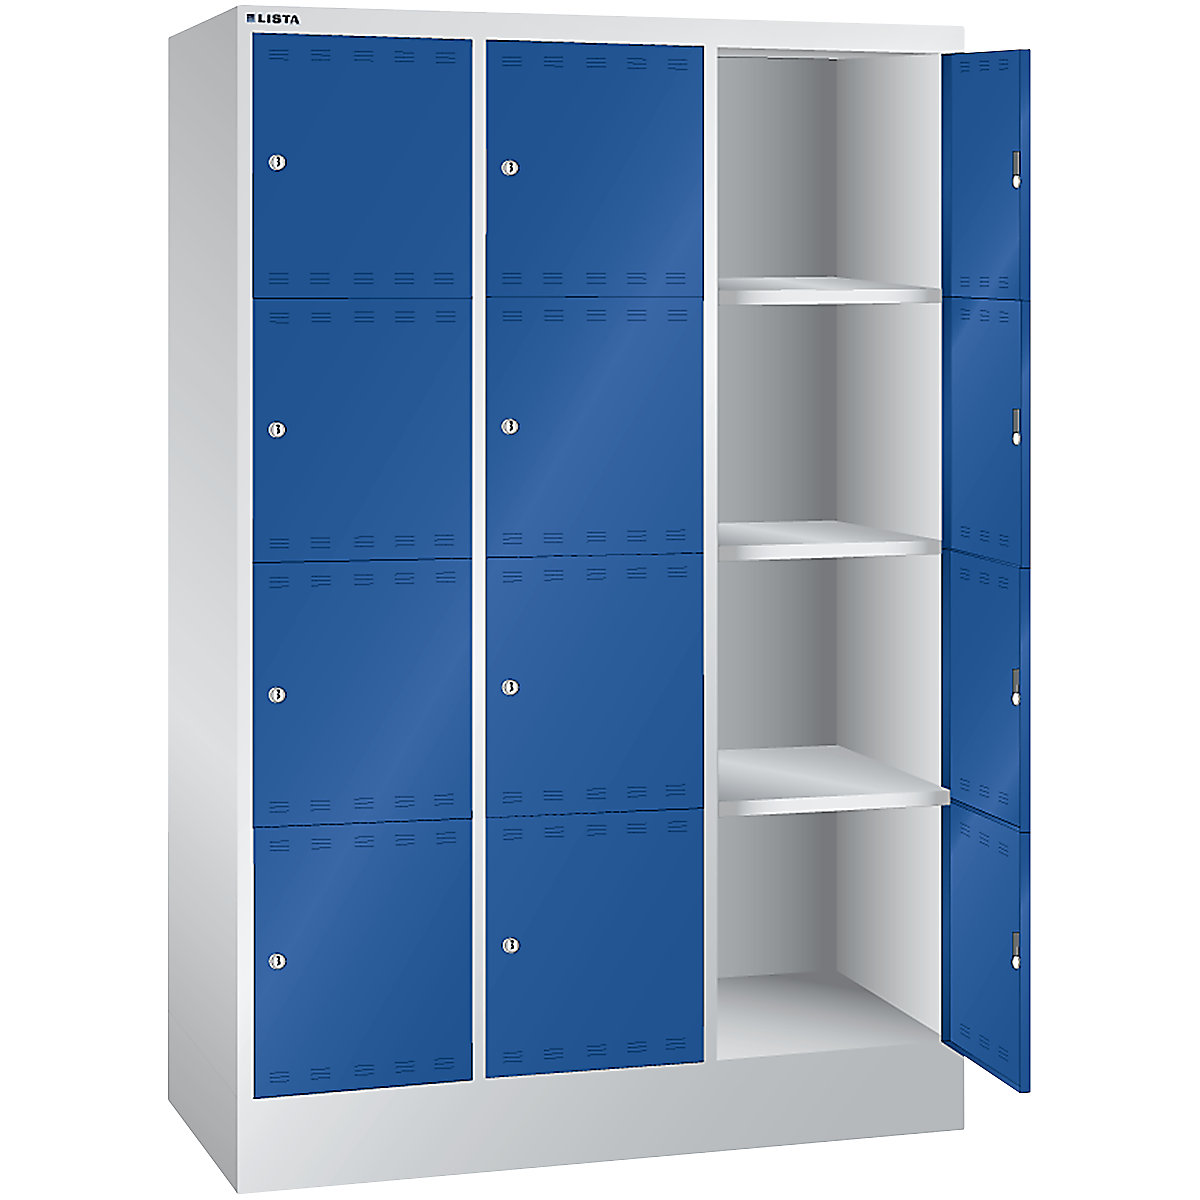 Battery charging cabinet with lockable compartments – LISTA